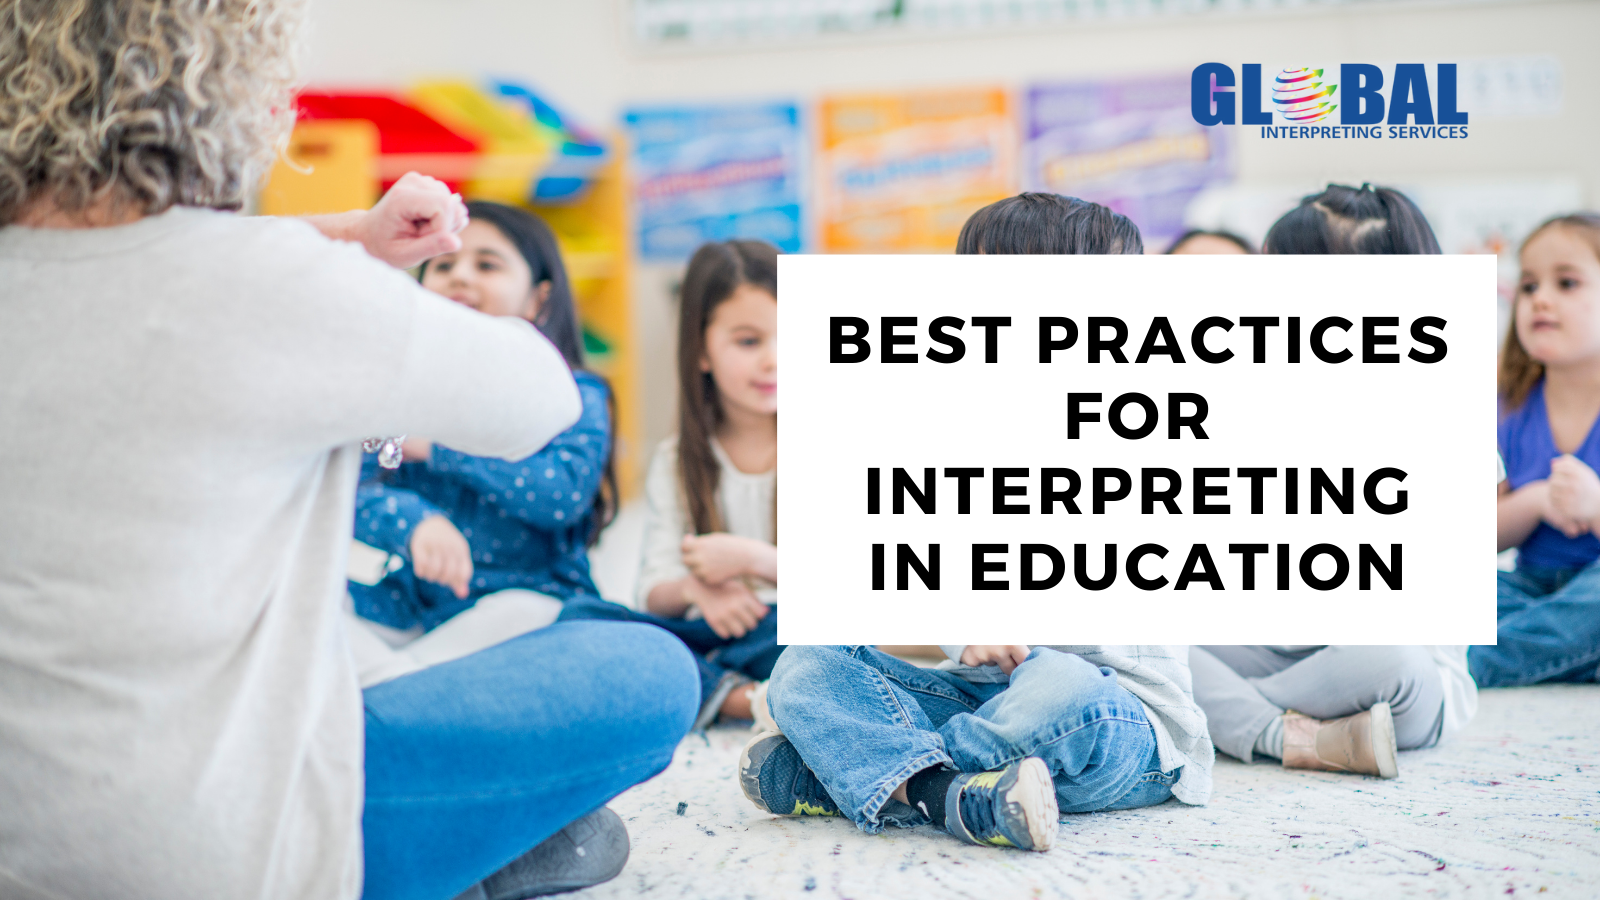 Best Interpreting Practices for Education